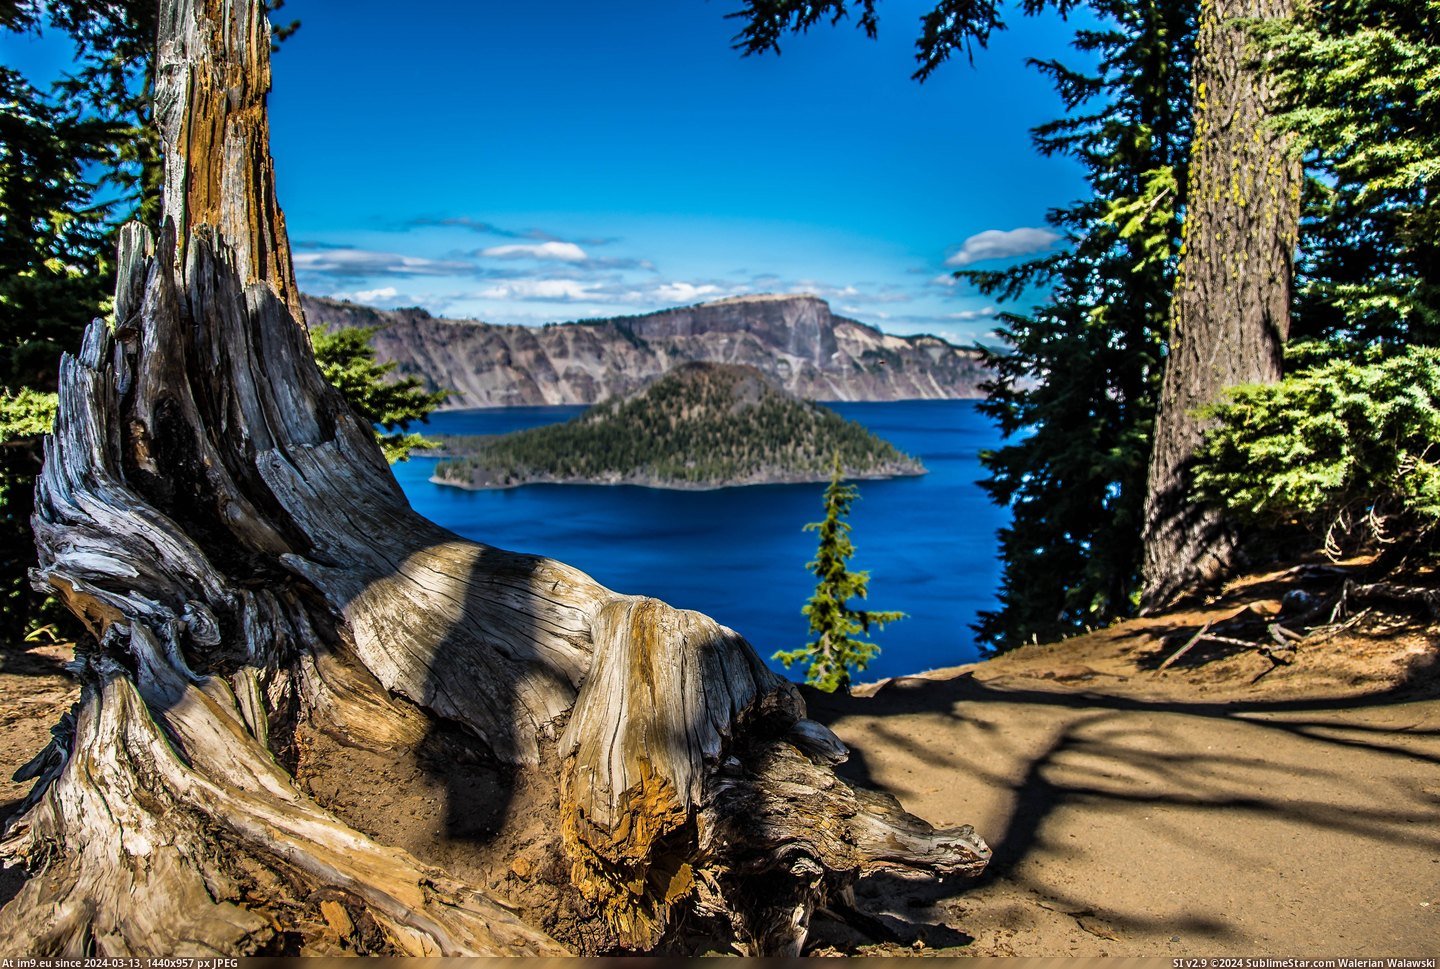 #Pretty #Lake #Did #Hiking #Crater #Little #Gorgeous #Angle [Earthporn] Did a little hiking around Crater Lake, OR. Pretty much every angle was a gorgeous view.  [5643x3762] Pic. (Изображение из альбом My r/EARTHPORN favs))